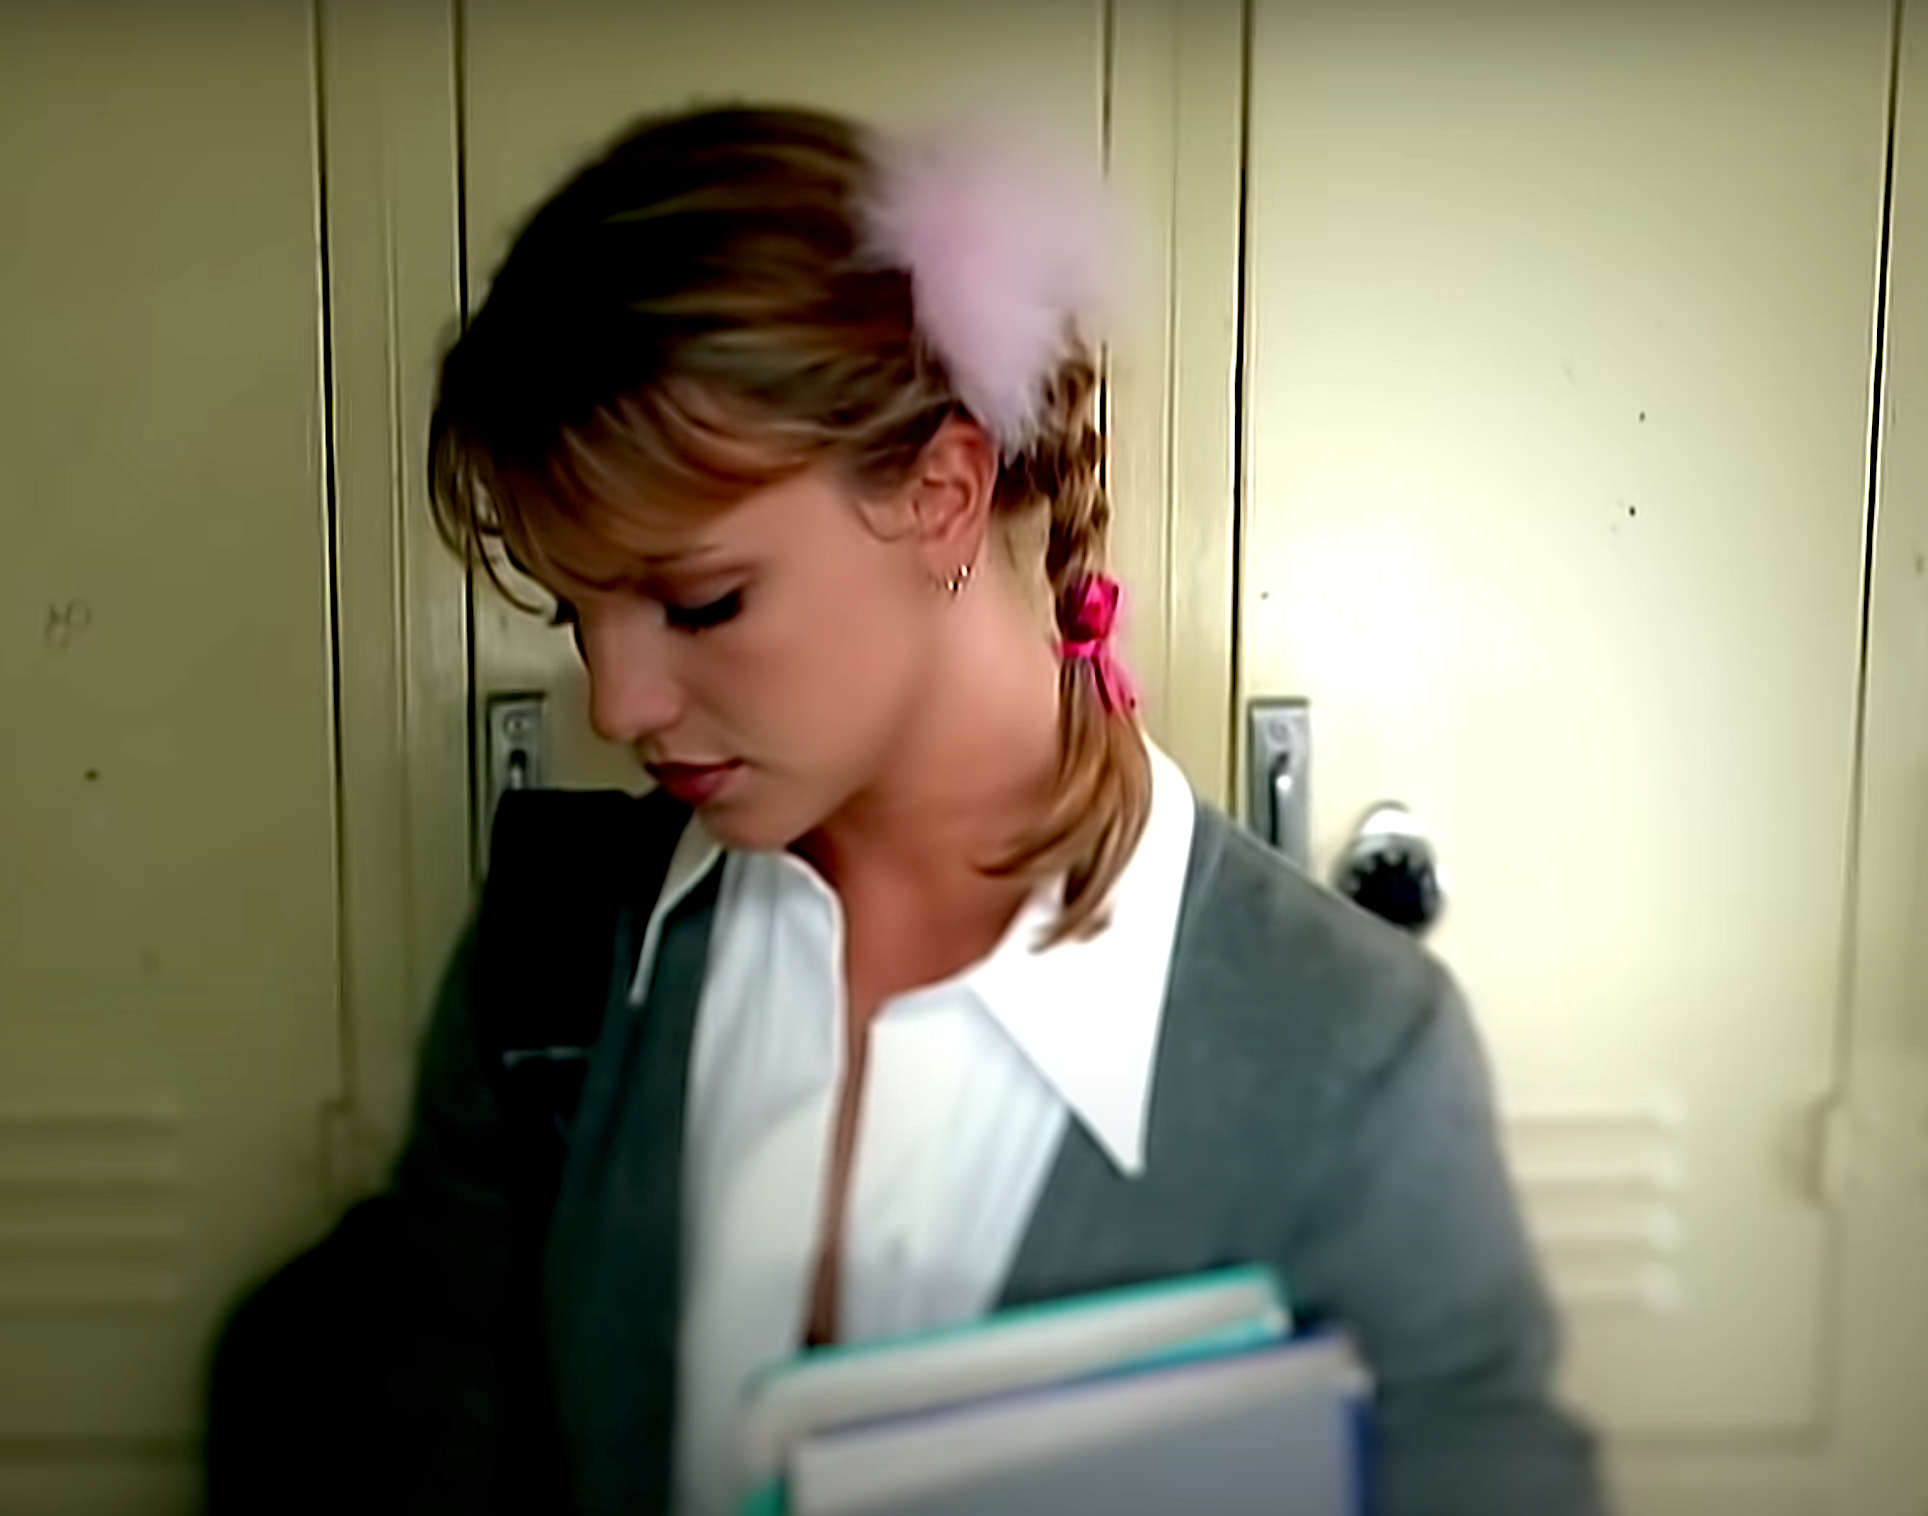 Britney Spears in pigtails for the "Baby One More Time" video